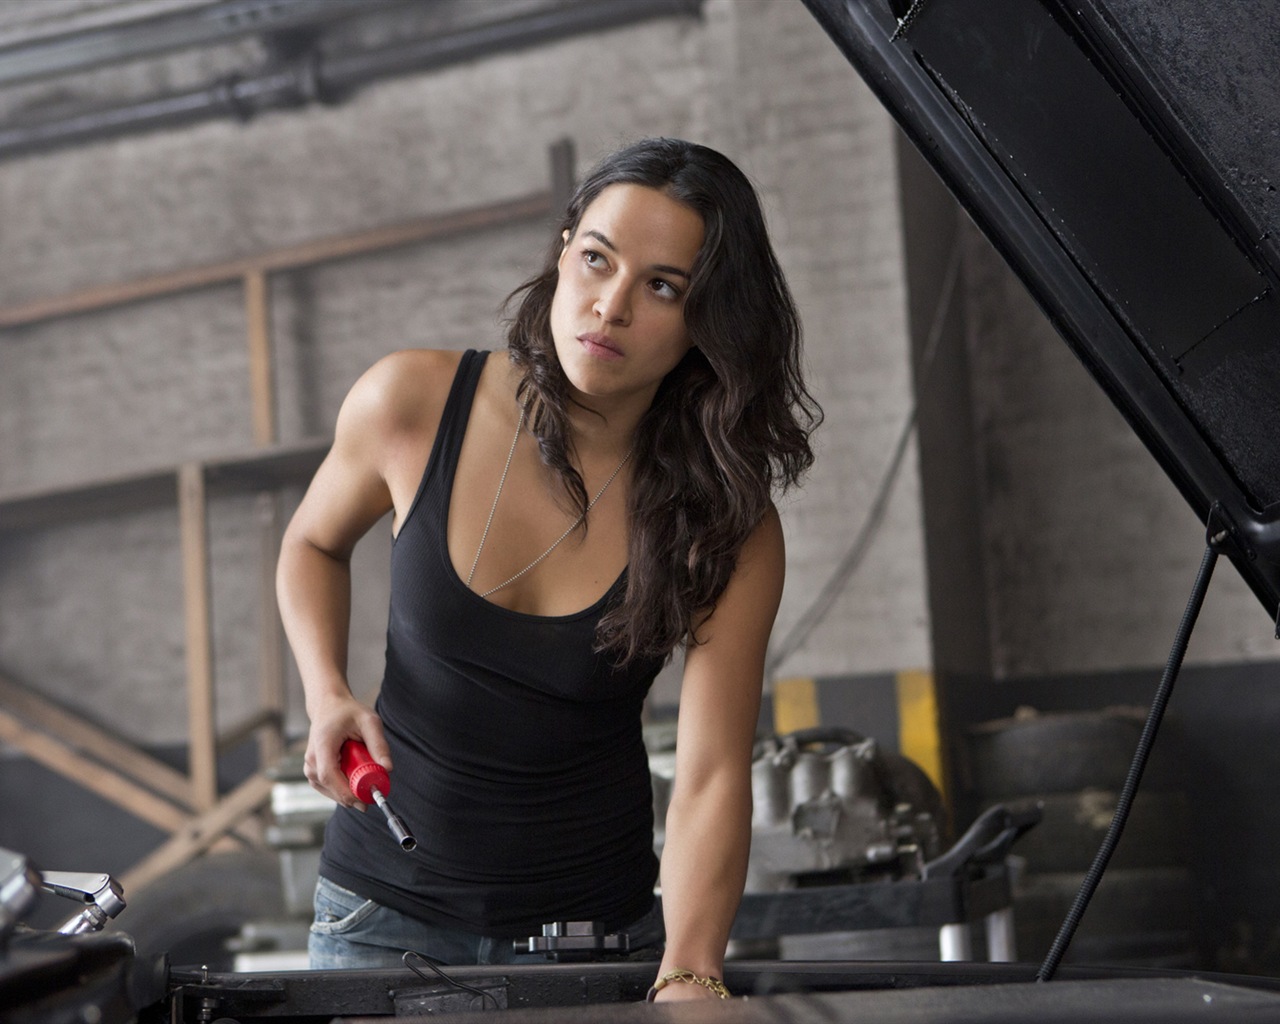 Fast And Furious 6 HD movie wallpapers #17 - 1280x1024